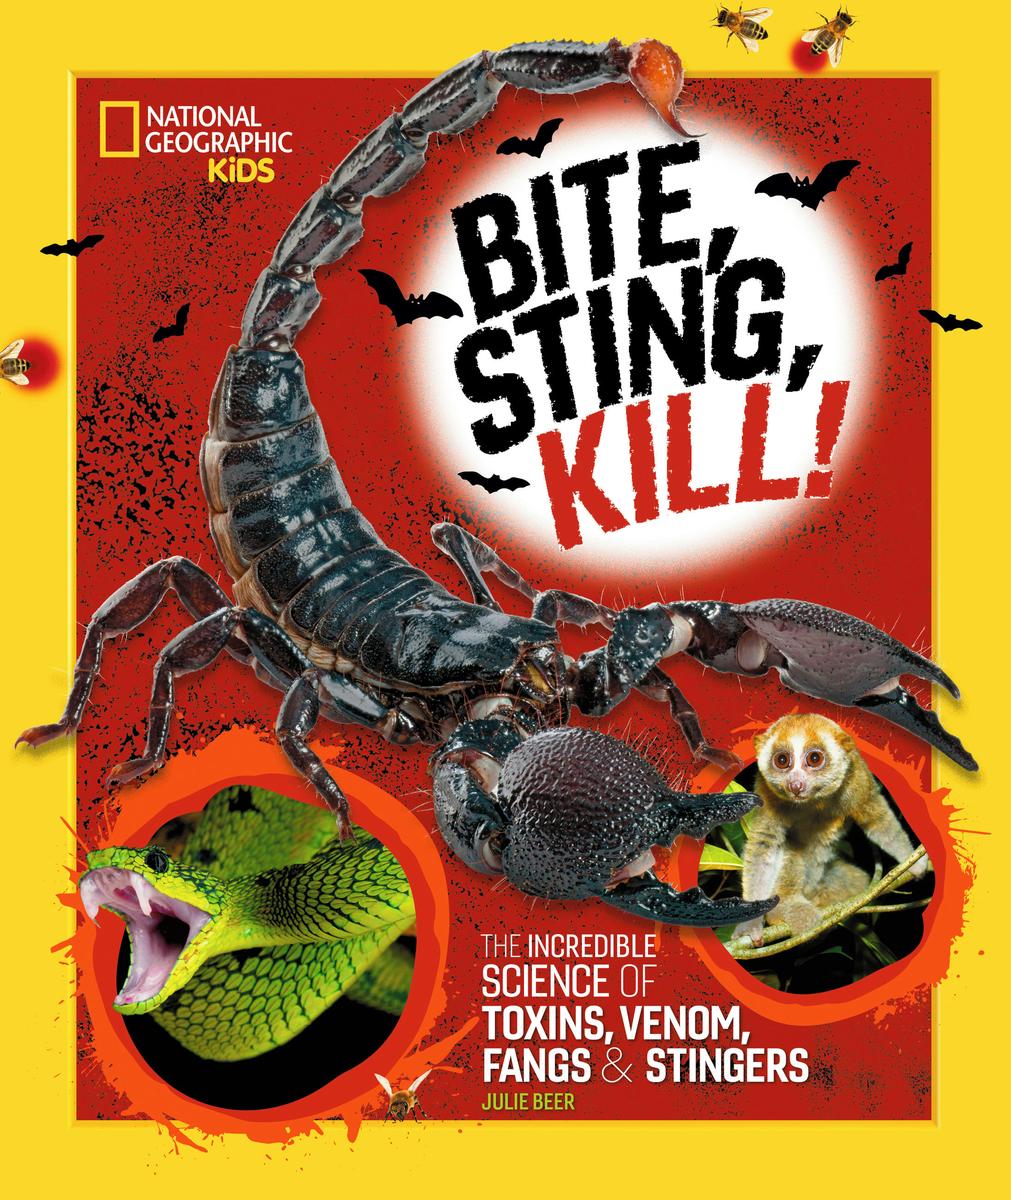 Bite, Sting, Kill - The Incredible Science of Toxins, Venom, Fangs, and Stingers